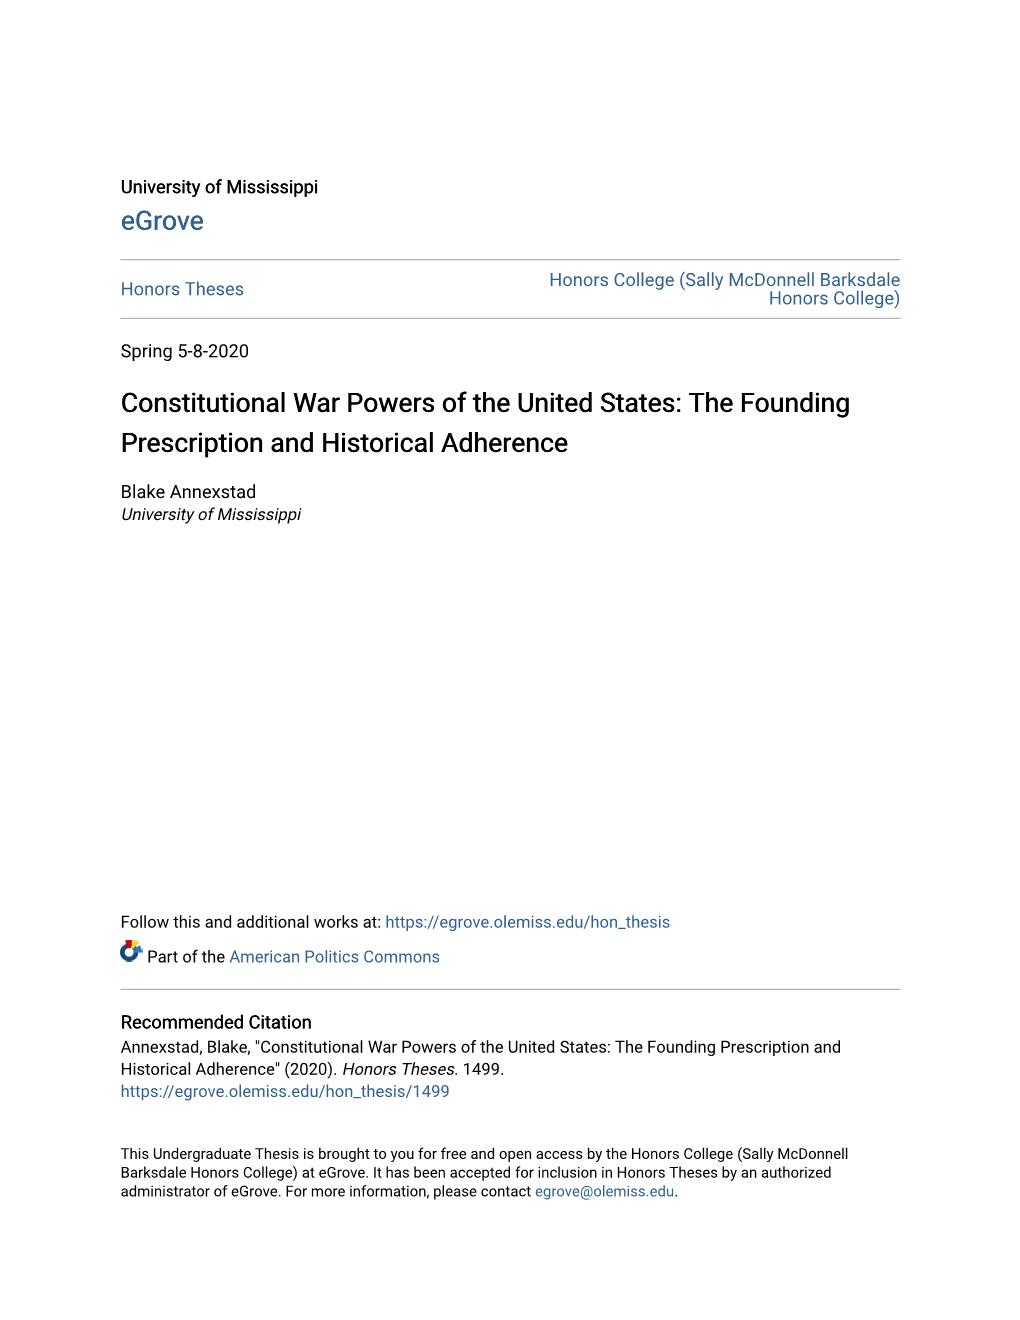 Constitutional War Powers of the United States: the Founding Prescription and Historical Adherence